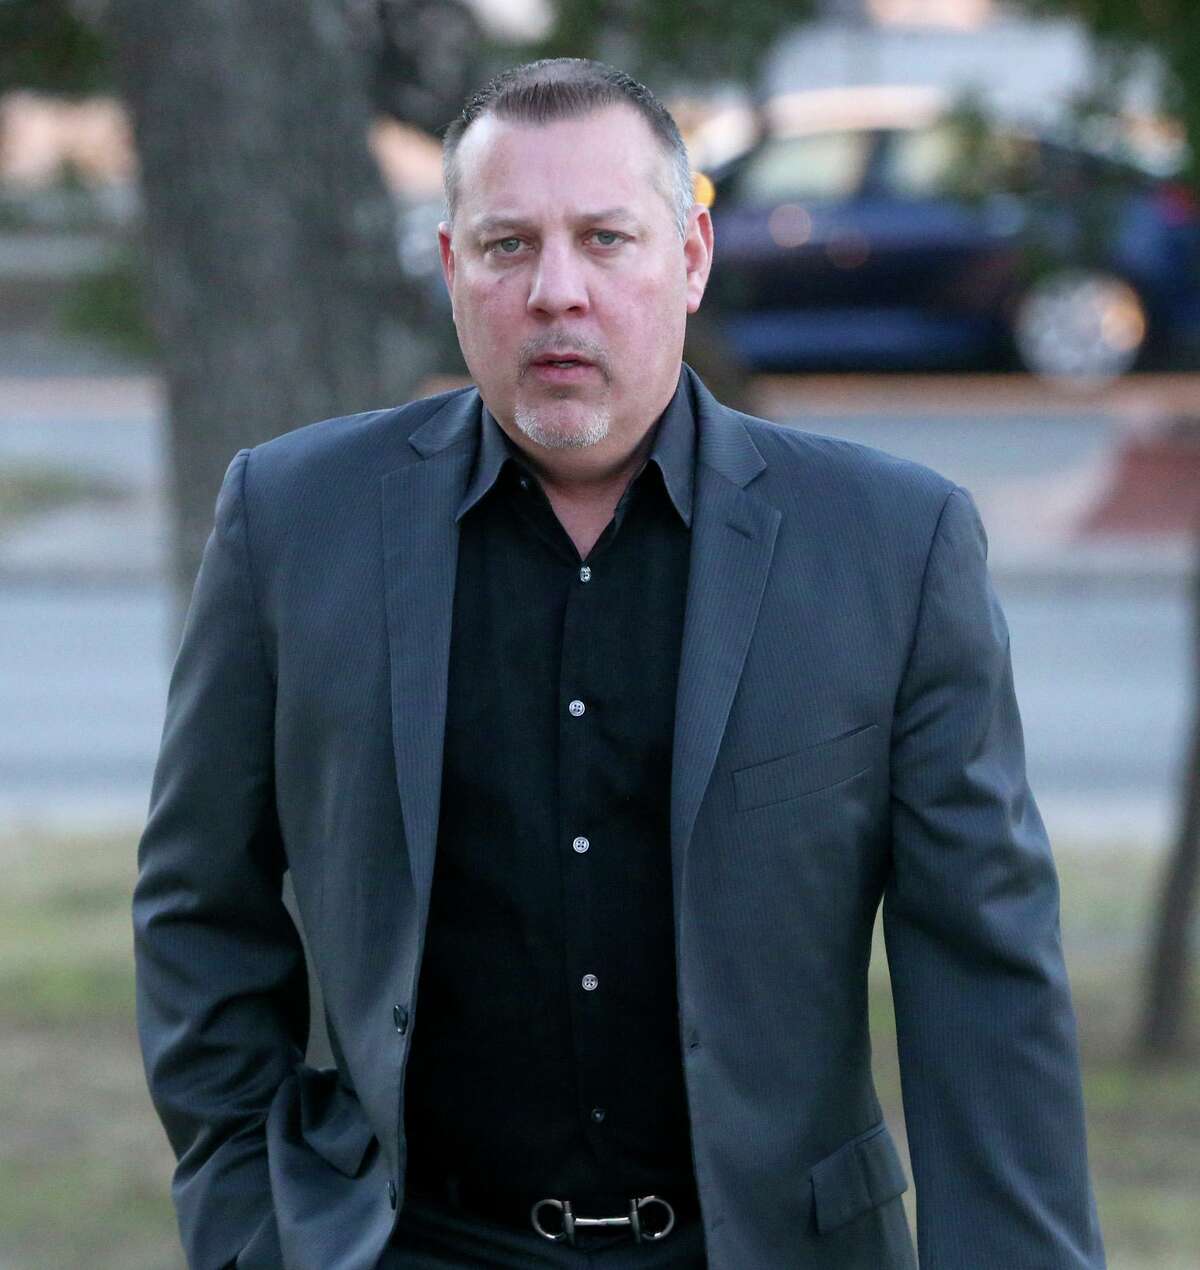 Former FourWinds Logistics CEO Stan Bates also had relationship with Cantu In the cross examination of Denise Cantu's shocking testimony, Uresti's lawyers targeted her romantic involvement with FourWinds' top executive to cast doubt on her credibility as the government’s key witness. Cantu acknowledged that she exchanged steamy text messages with Bates shortly after the two met in 2014.